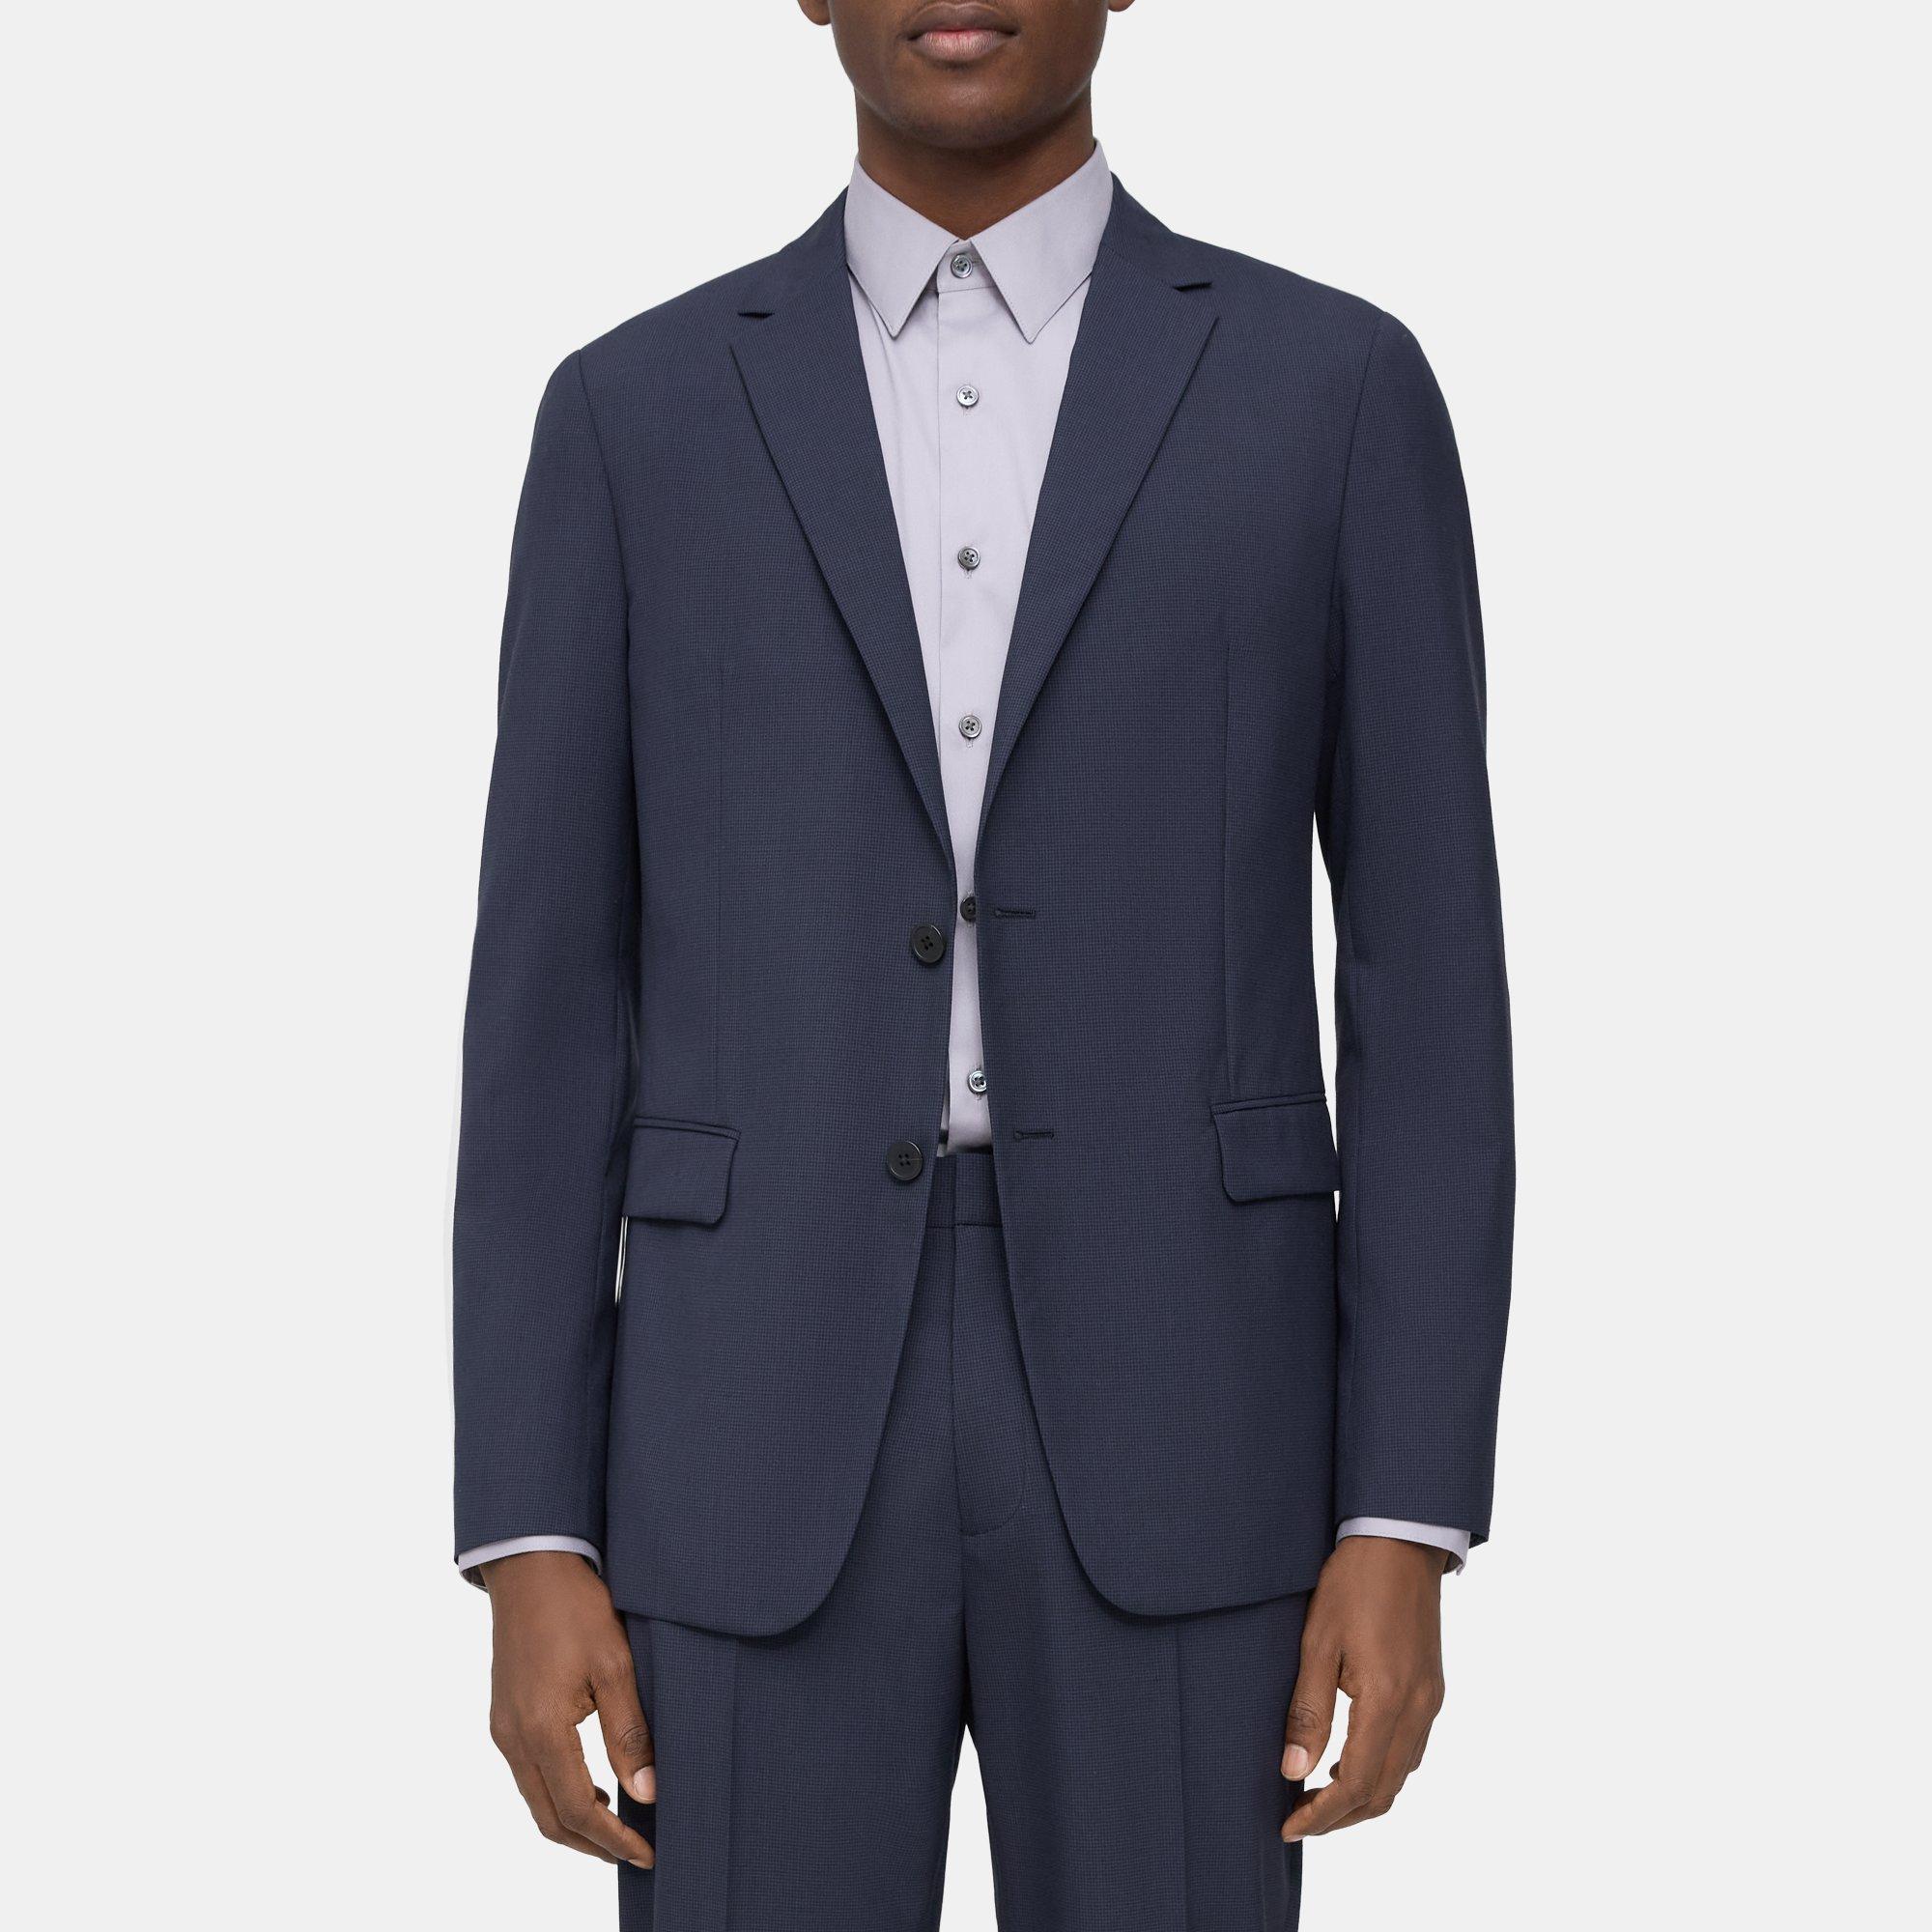 Theory Unstructured Blazer in Houndstooth Wool Blend